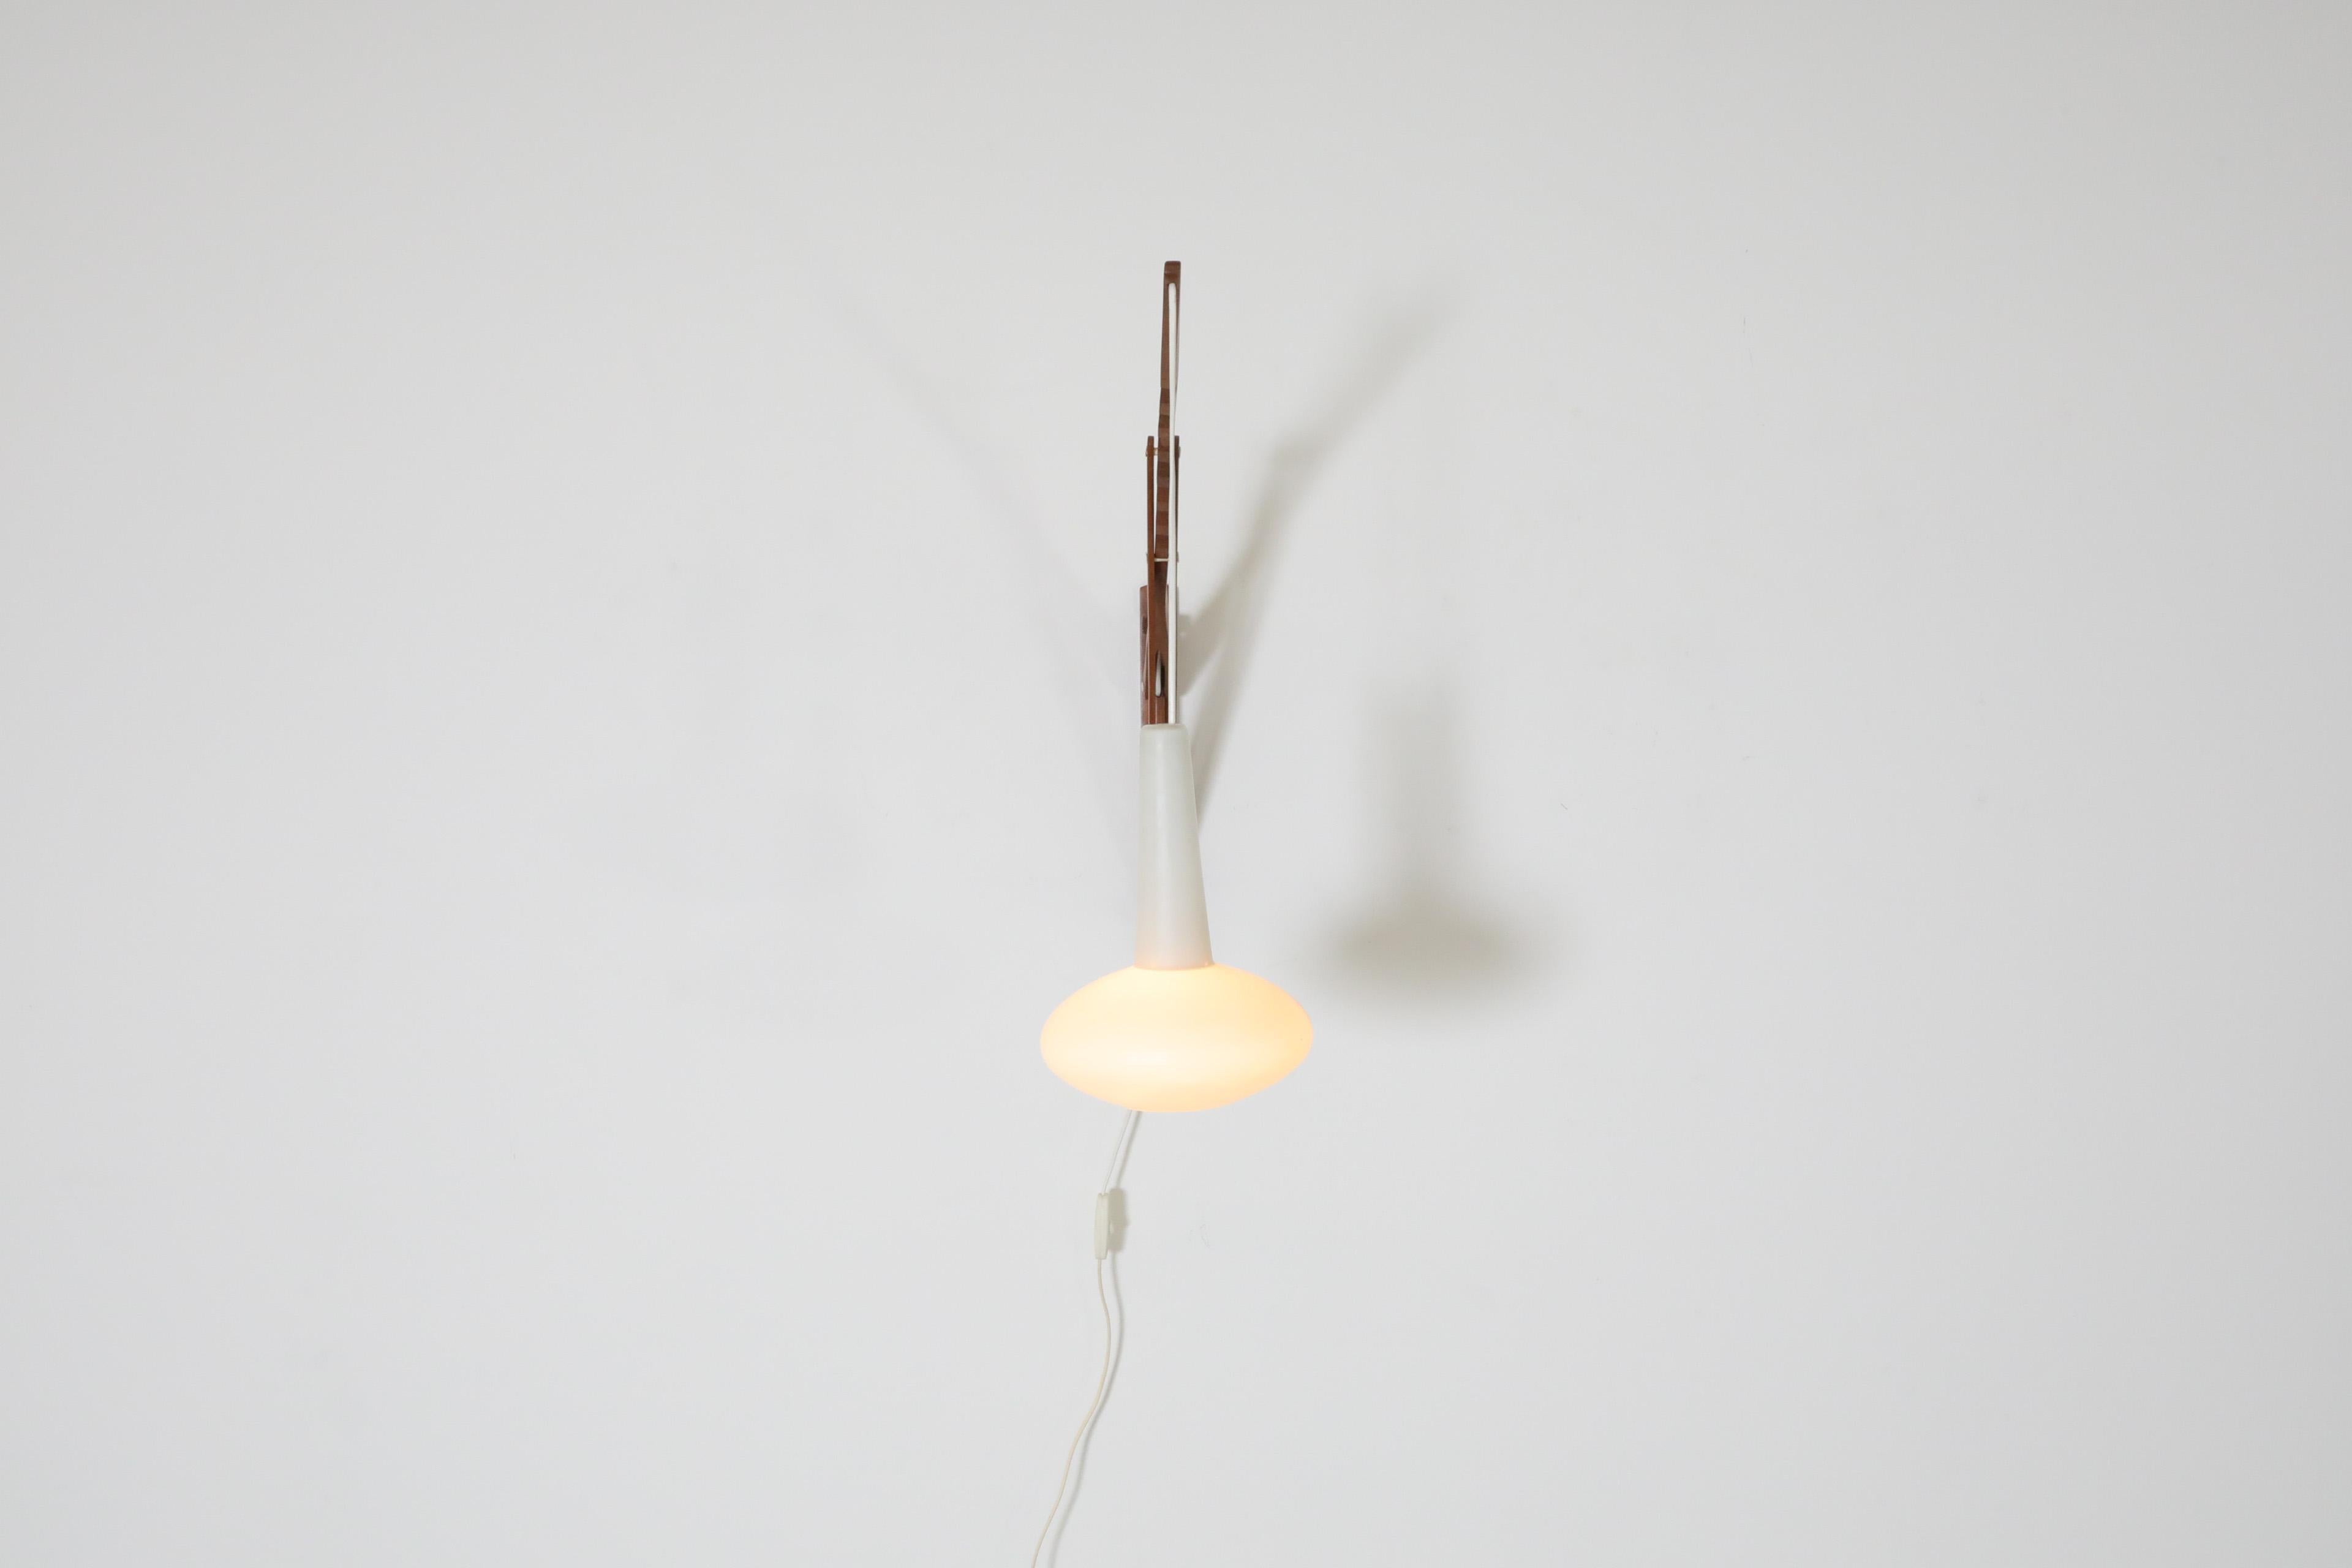 Danish Mid-century, Louis Poulsen style, teak wall mount sconce with hanging milk glass shade. This incredibly designed wall lamp is height and angle adjustable using the notches on its pole and stem. This sconce is perfect for a cozy reading space